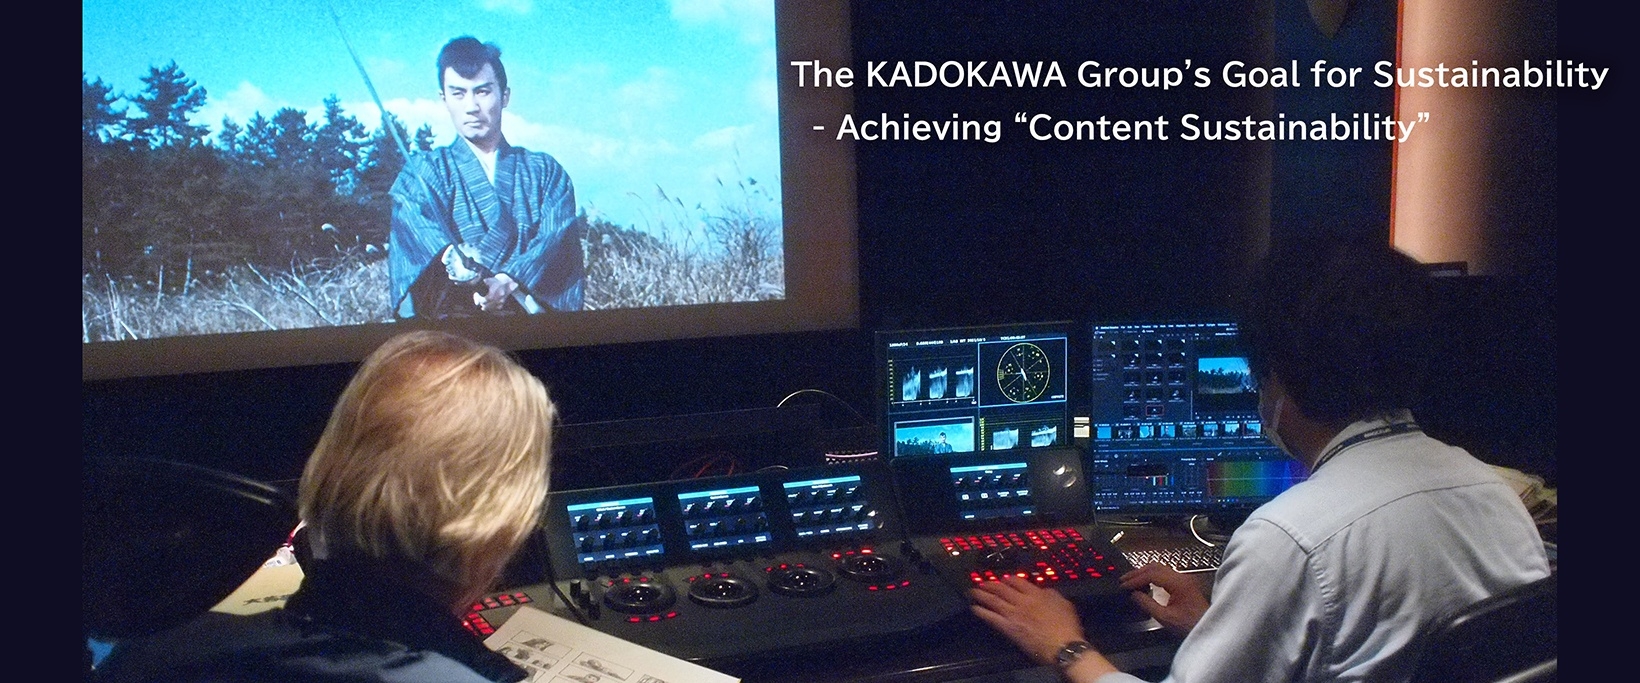 The KADOKAWA Group's Goal for Sustainability - Achieving “Content Sustainability”